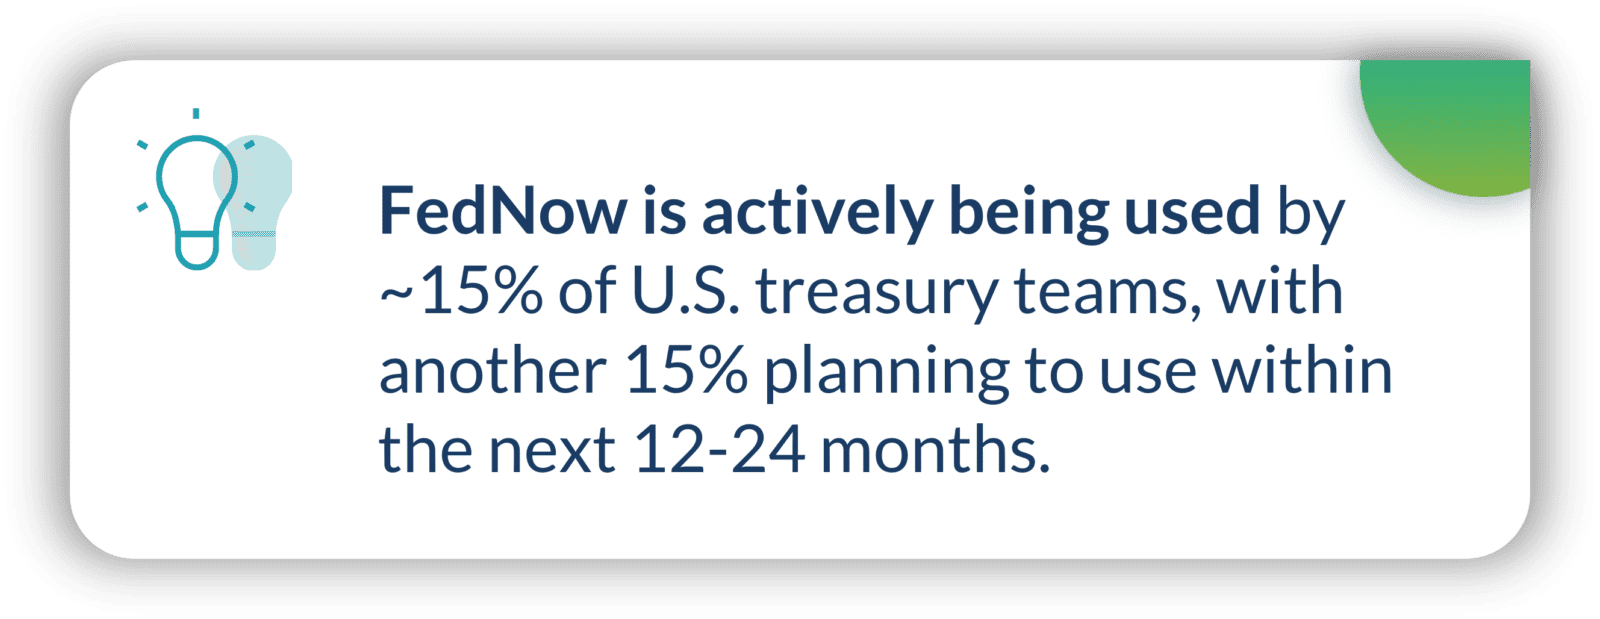 FedNow is actively being used by ~15% of U.S. treasury teams, with another 15% planning to use within the next 12-24 months.